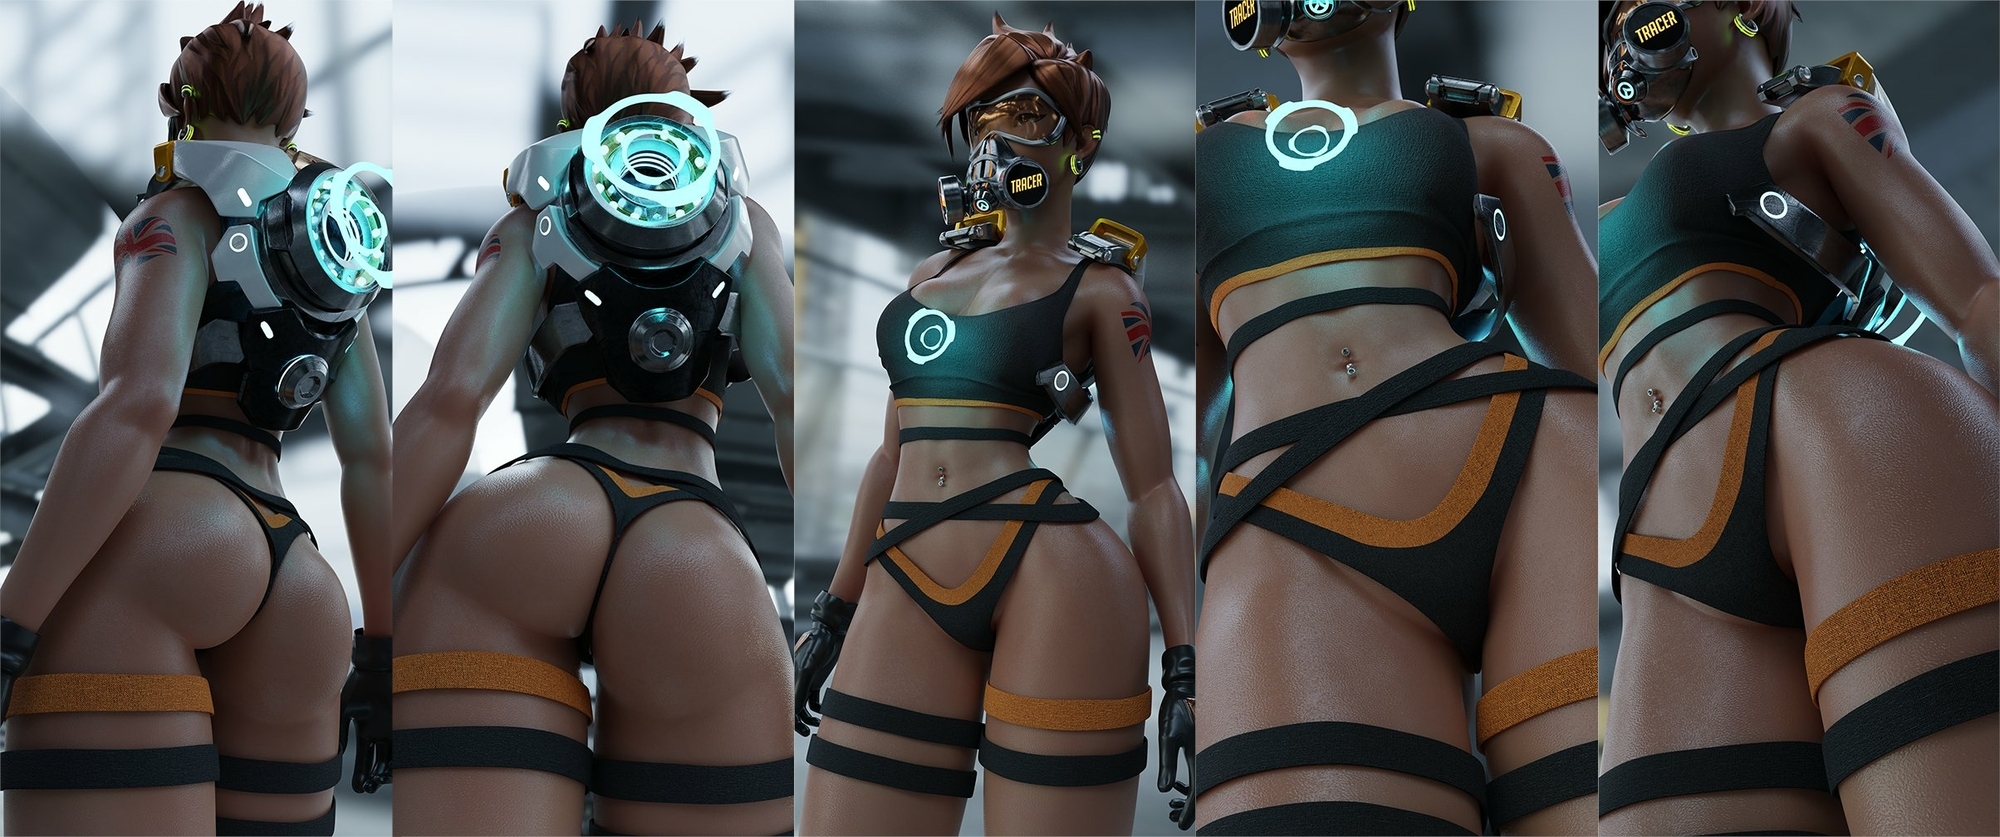 She could trace me anytime 😏 Tracer Overwatch 3d Porn Sexy Sfw Big Booty Perfect Body Outfit 3d Girl Brunette Piercing Gas Mask Fit Posing